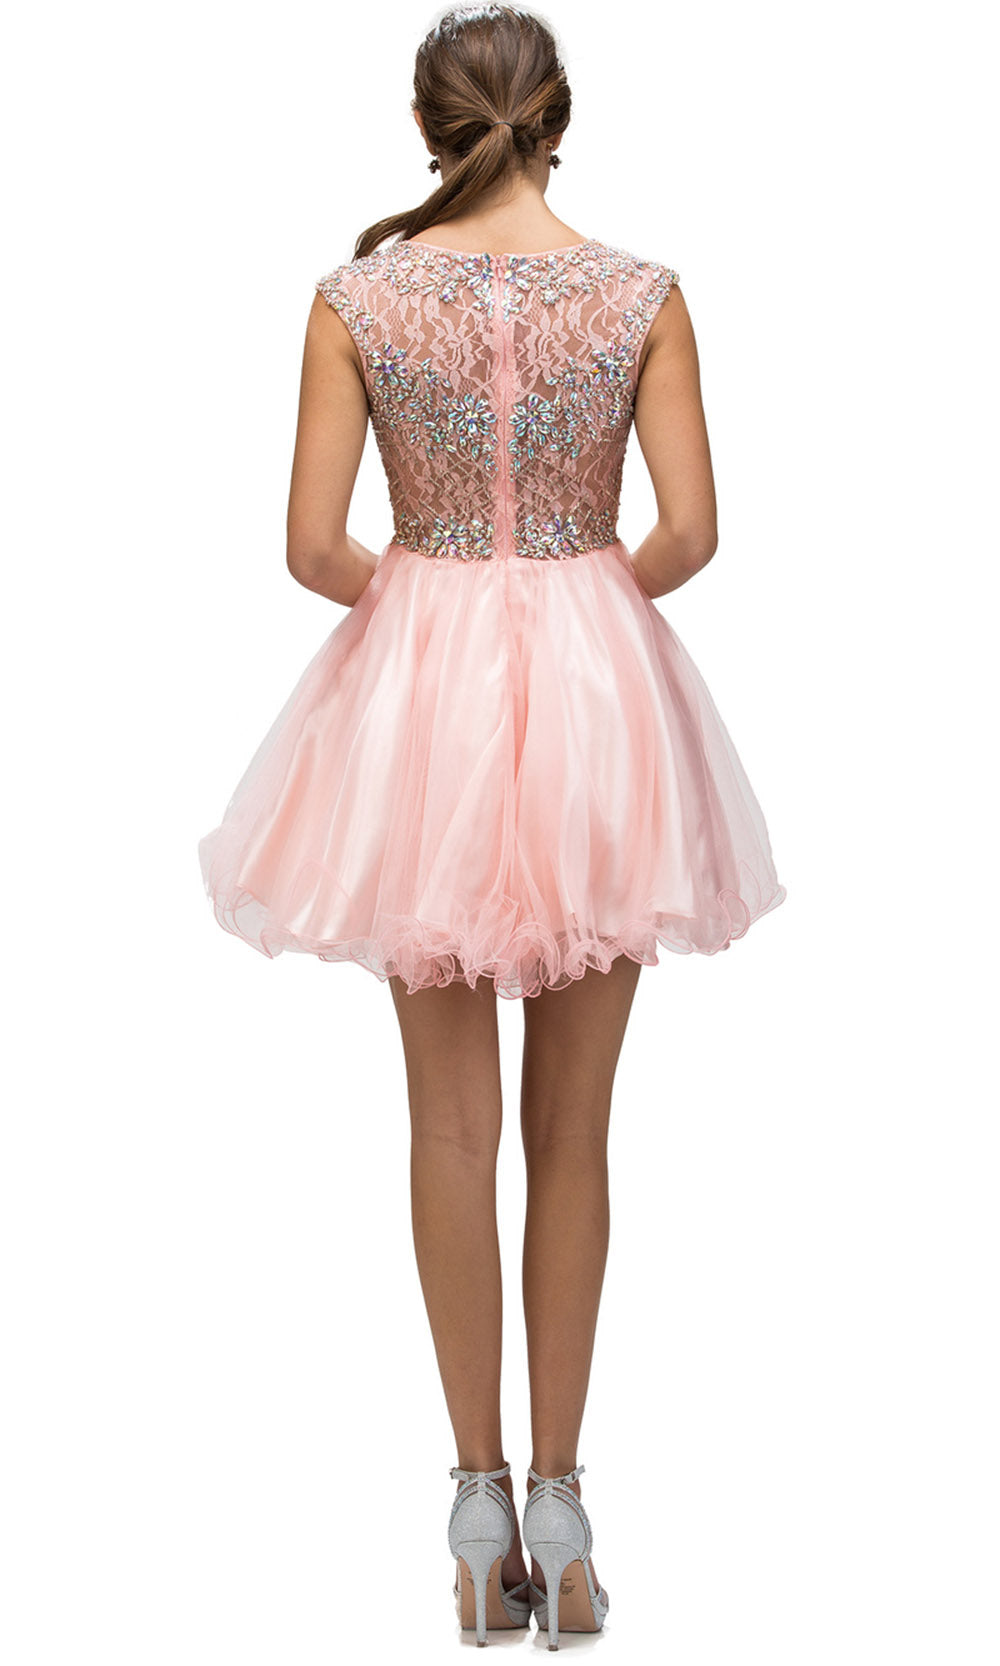 Dancing Queen - 9149 Multi-Beaded Bodice Fit And Flare Cocktail Dress In Pinkgrade 8 grad dresses, graduation dresses